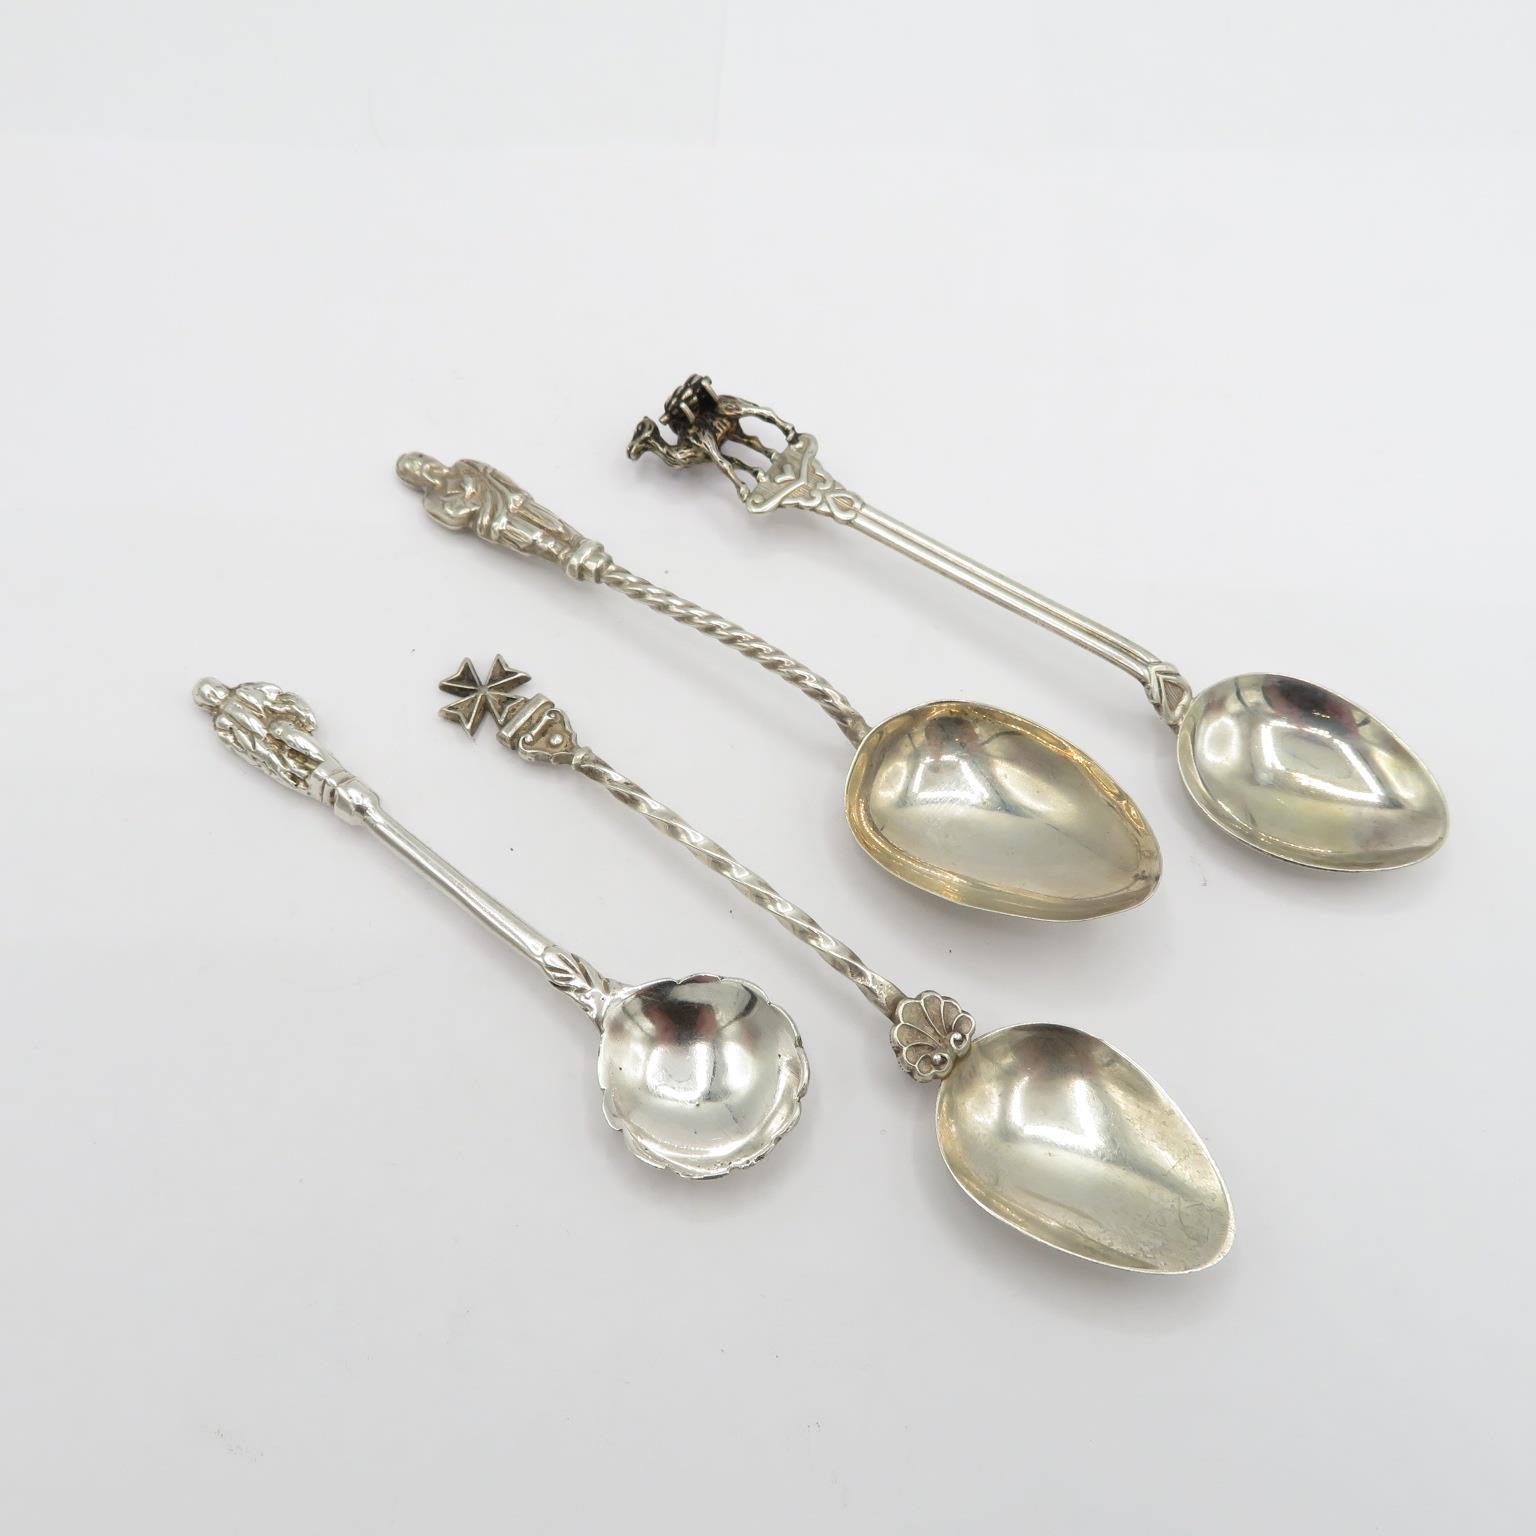 112g HM silver spoons - Image 2 of 4